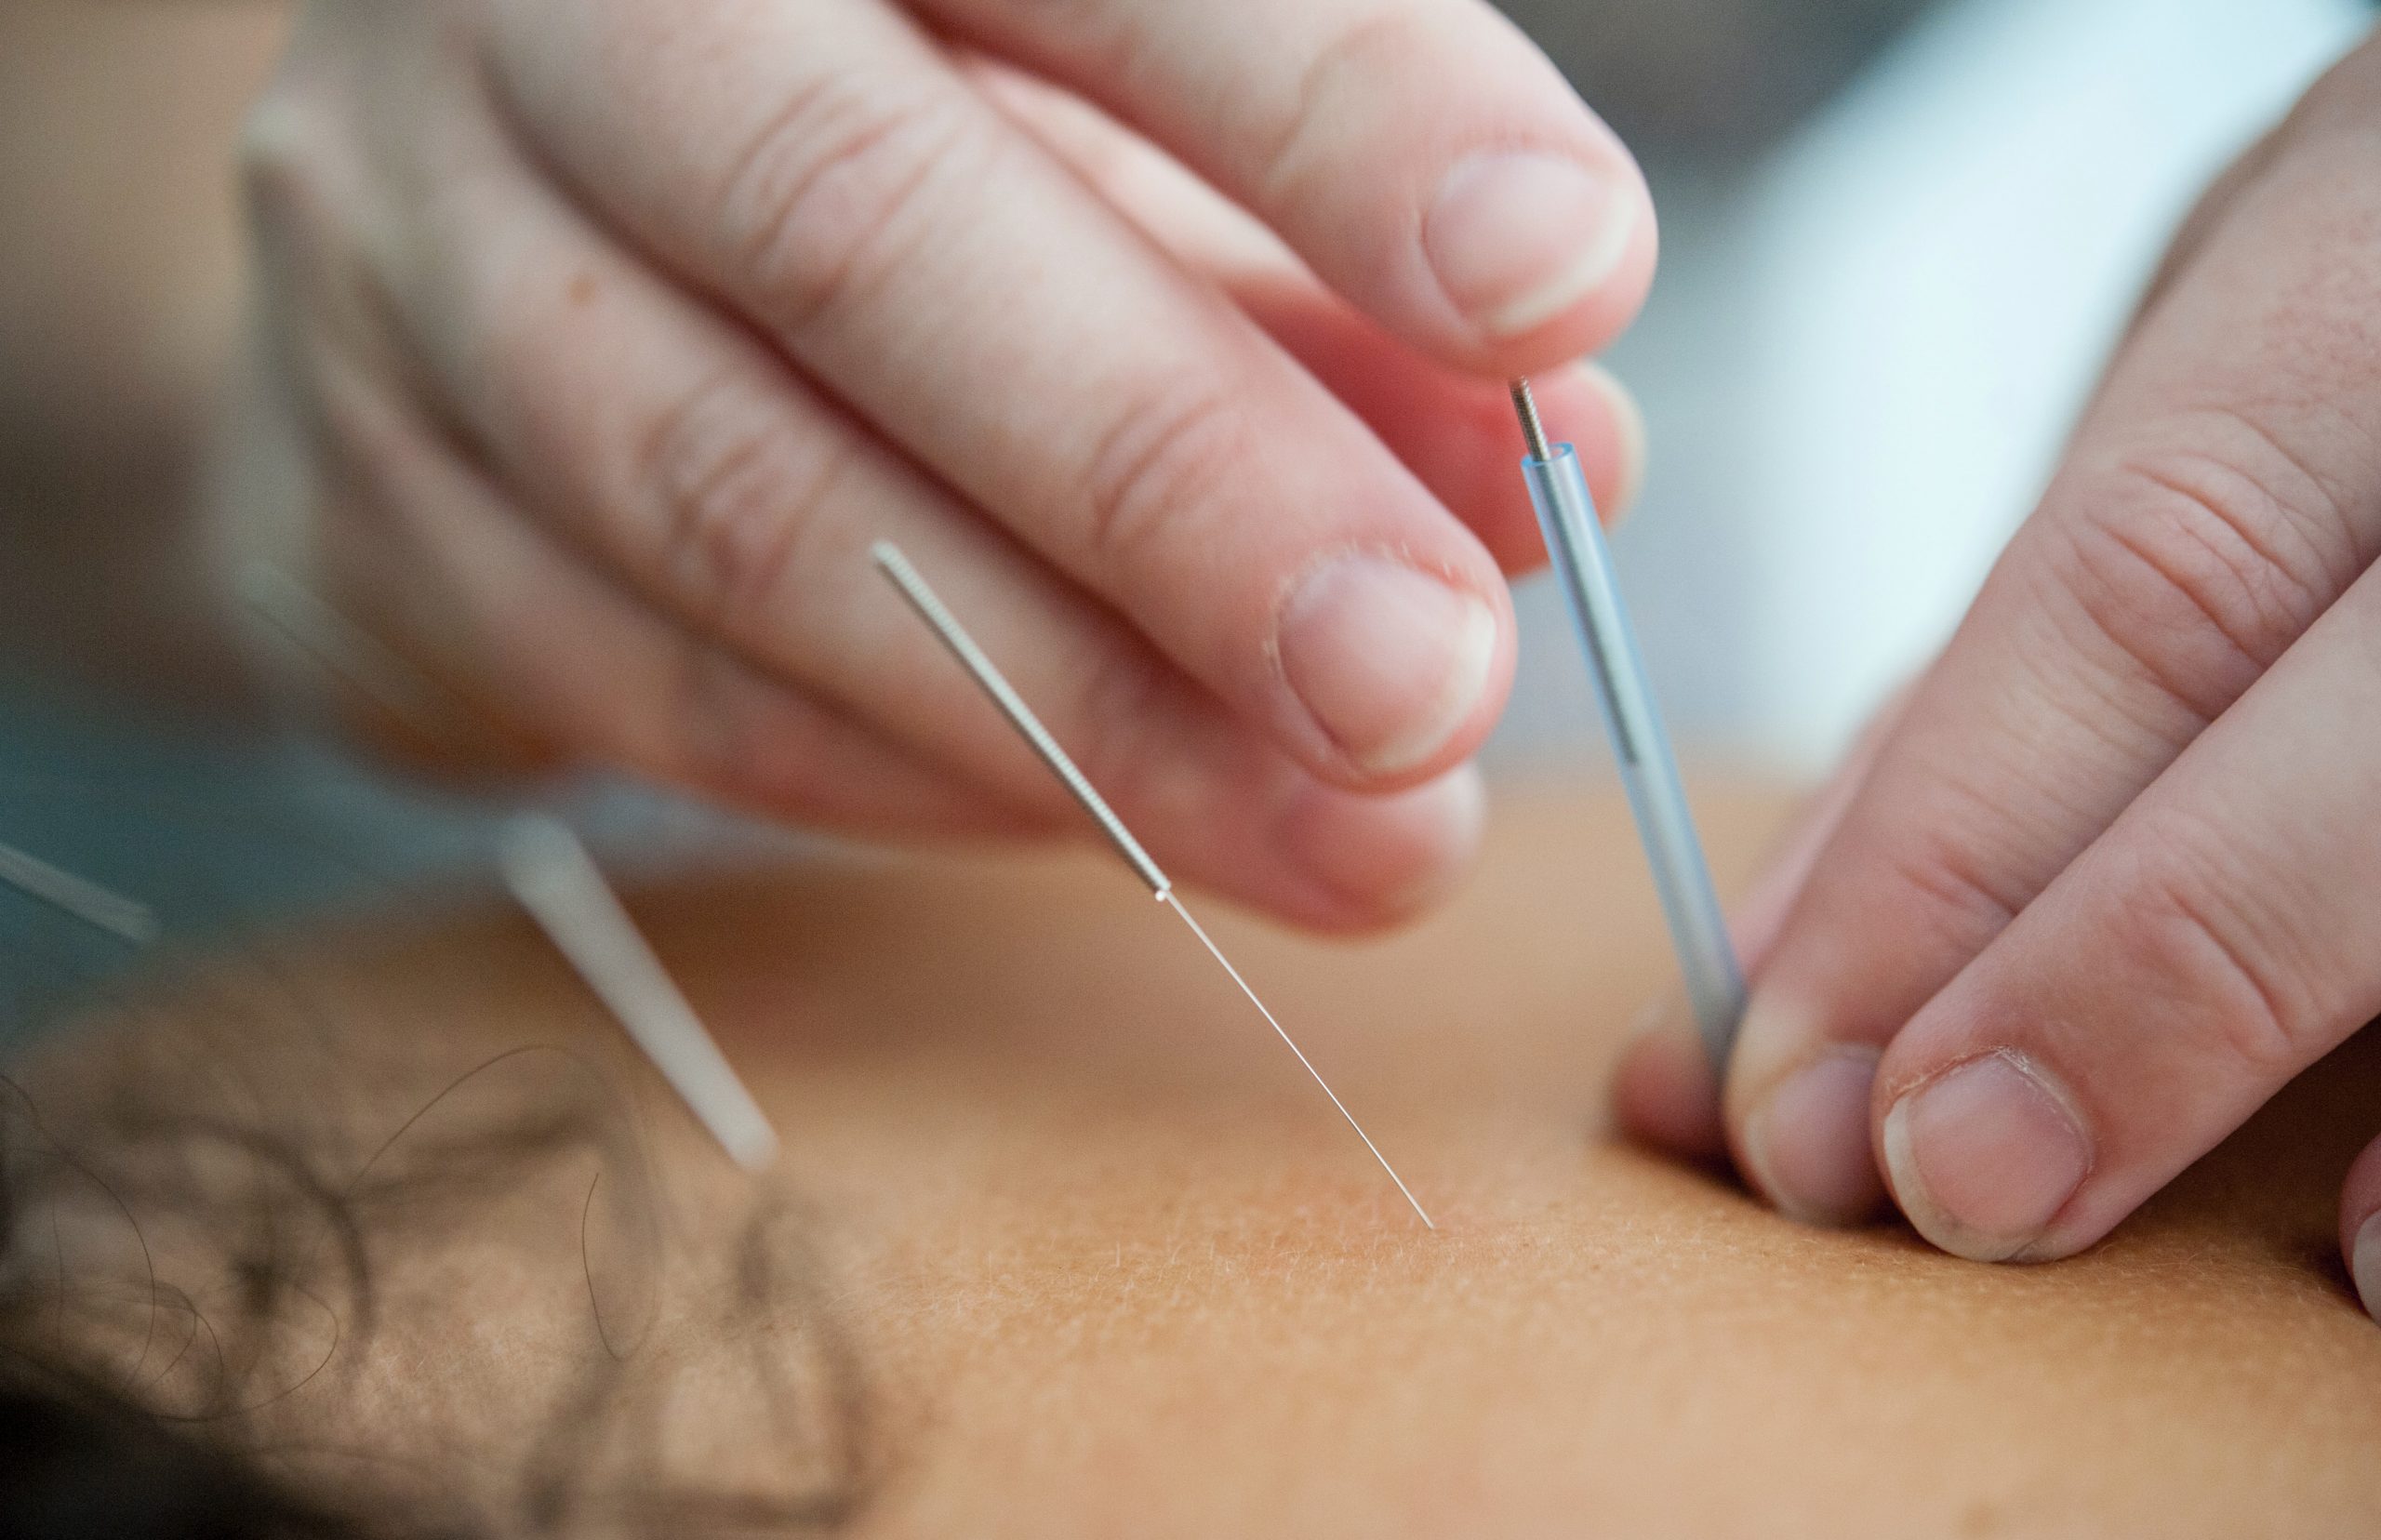 We Dont Just Offer Traditional Physiotherapy At Physio Ldn, Through Acupuncture We Are Able To Treat A Variety Of Issues